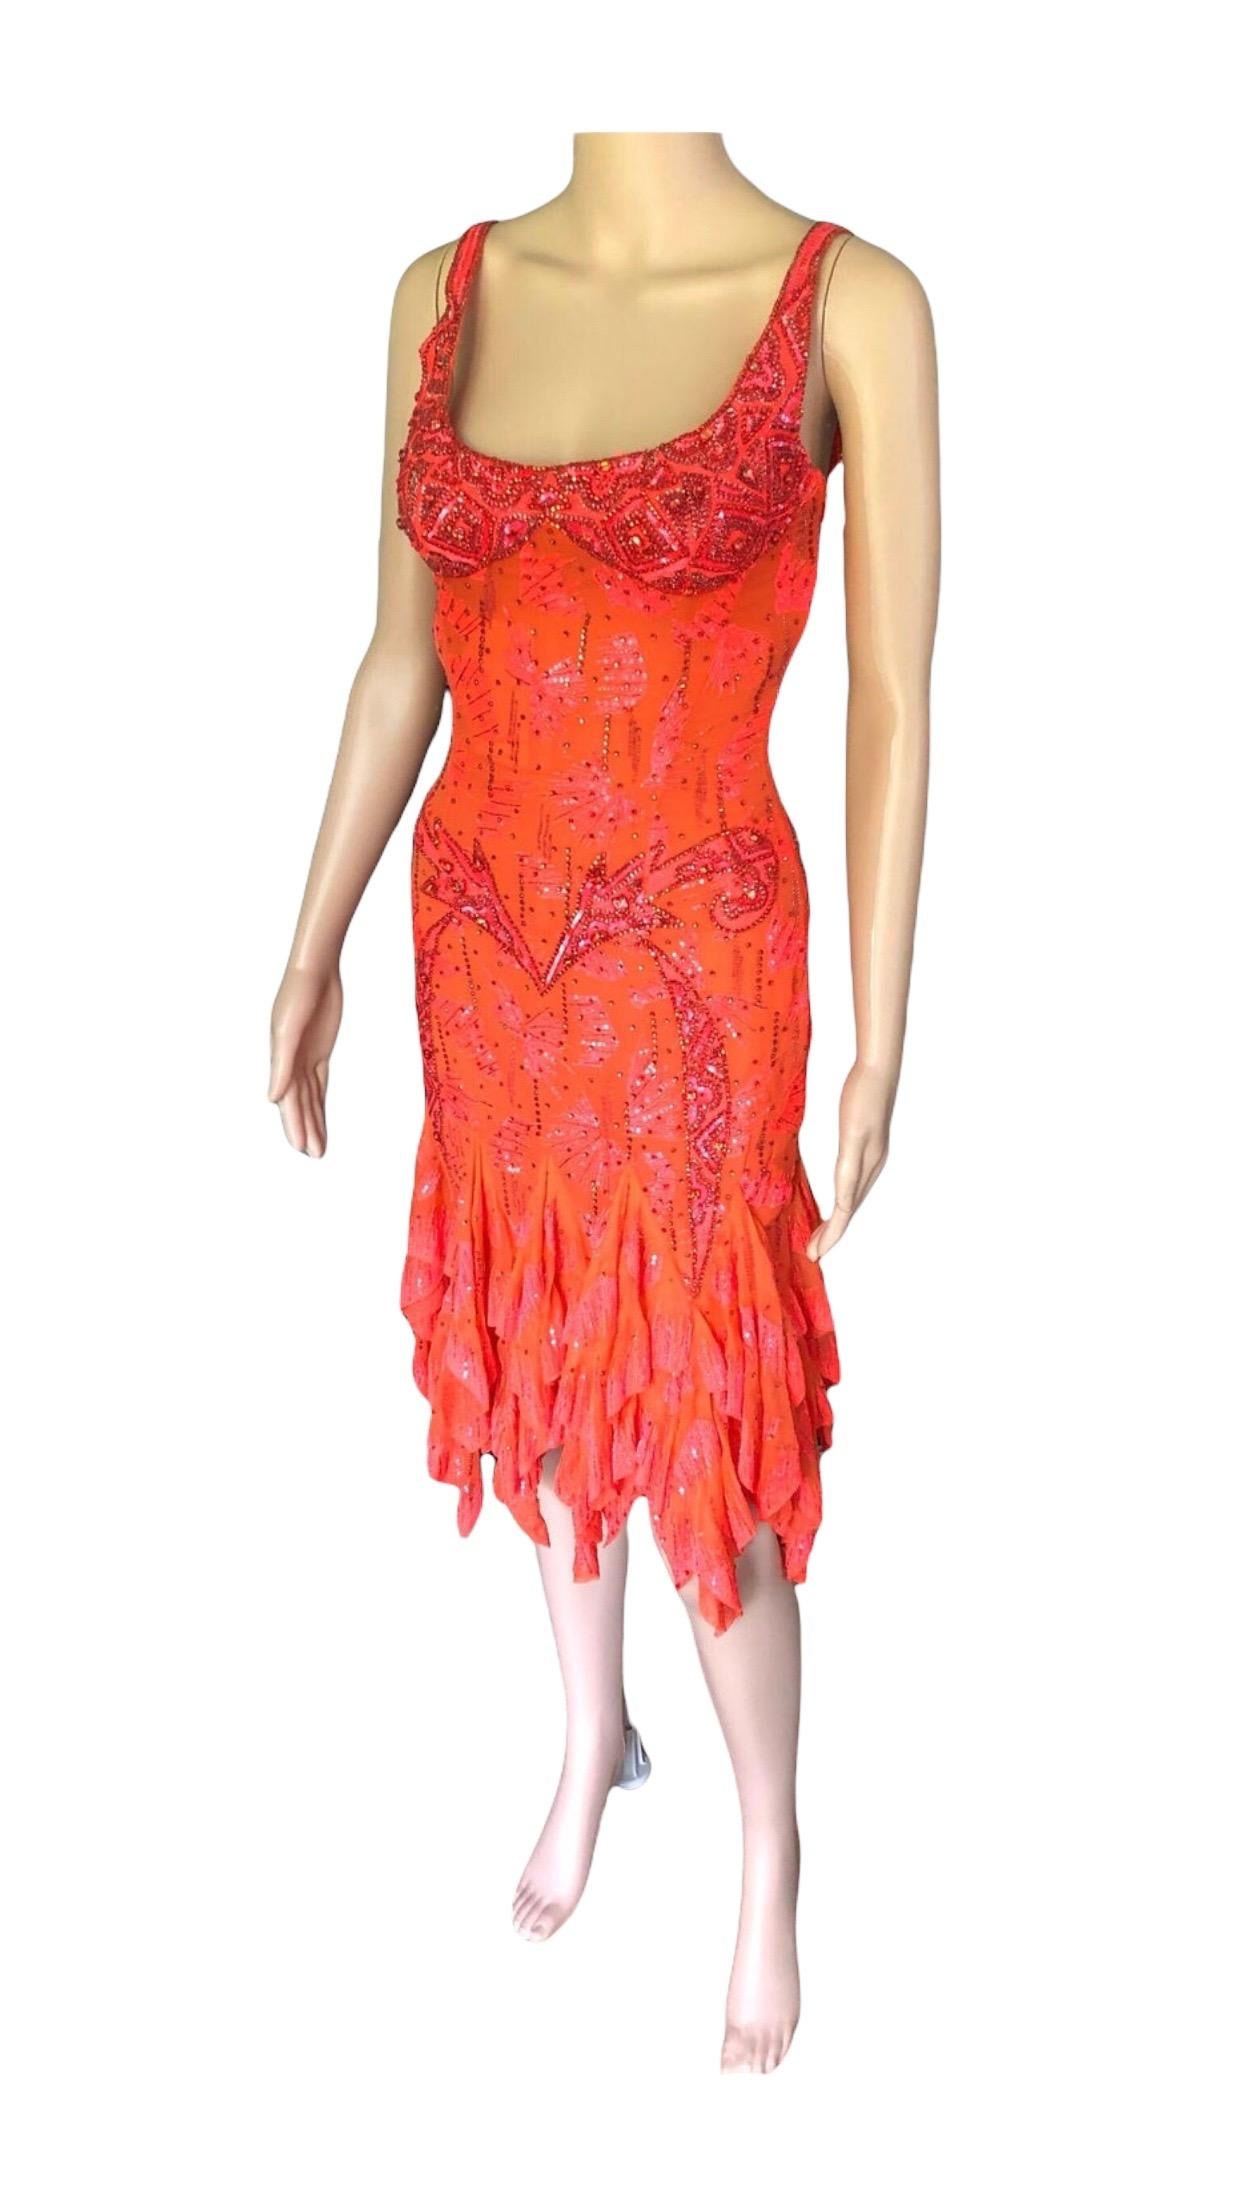 Atelier Versace by Gianni Versace S/S 2002 Haute Couture Embellished Dress For Sale 4